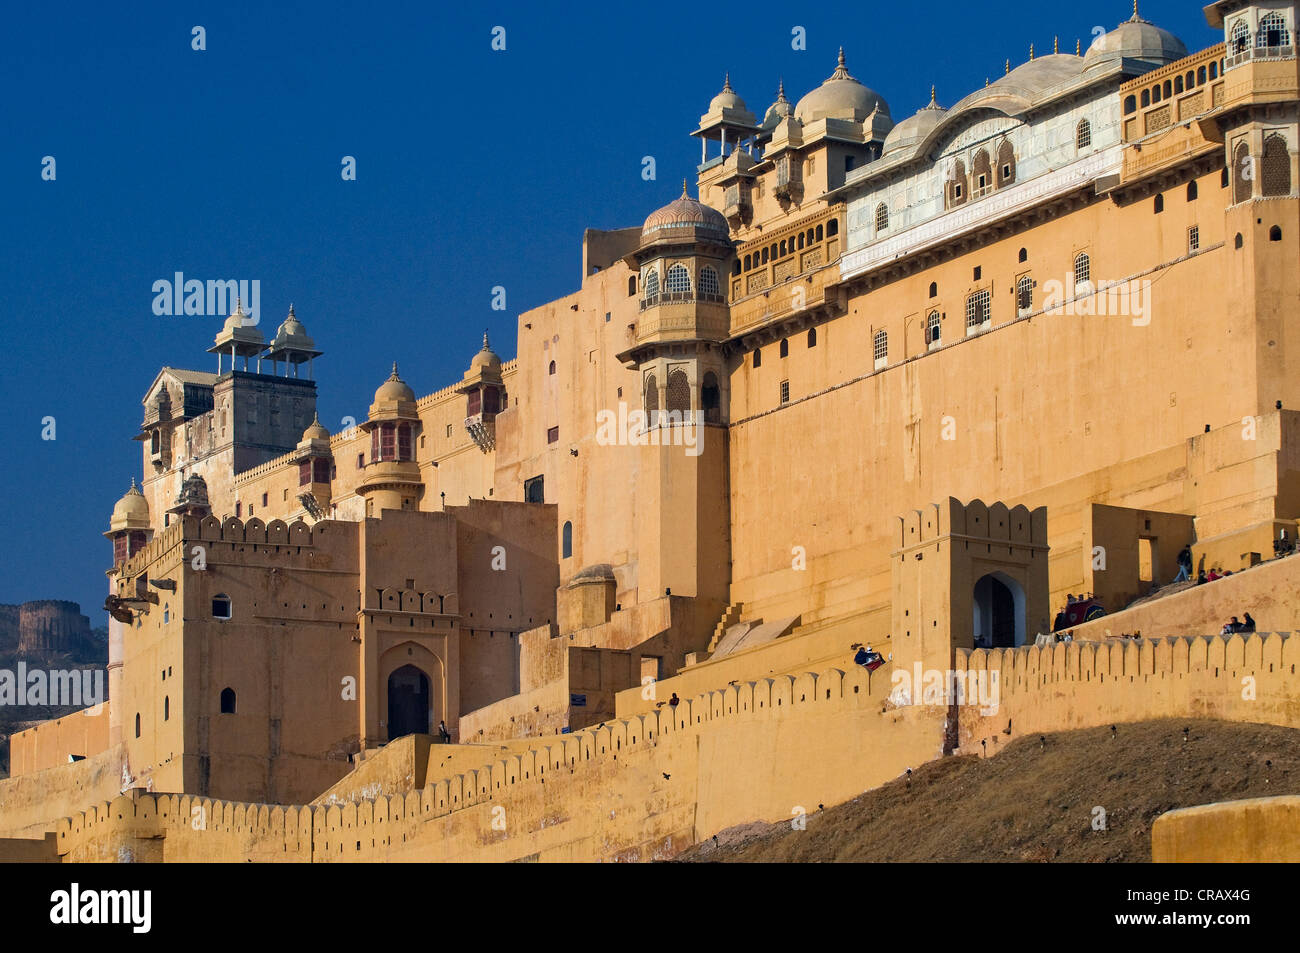 Amber Fort fortress, Amber, near Jaipur, Rajasthan, India, Asia Stock Photo